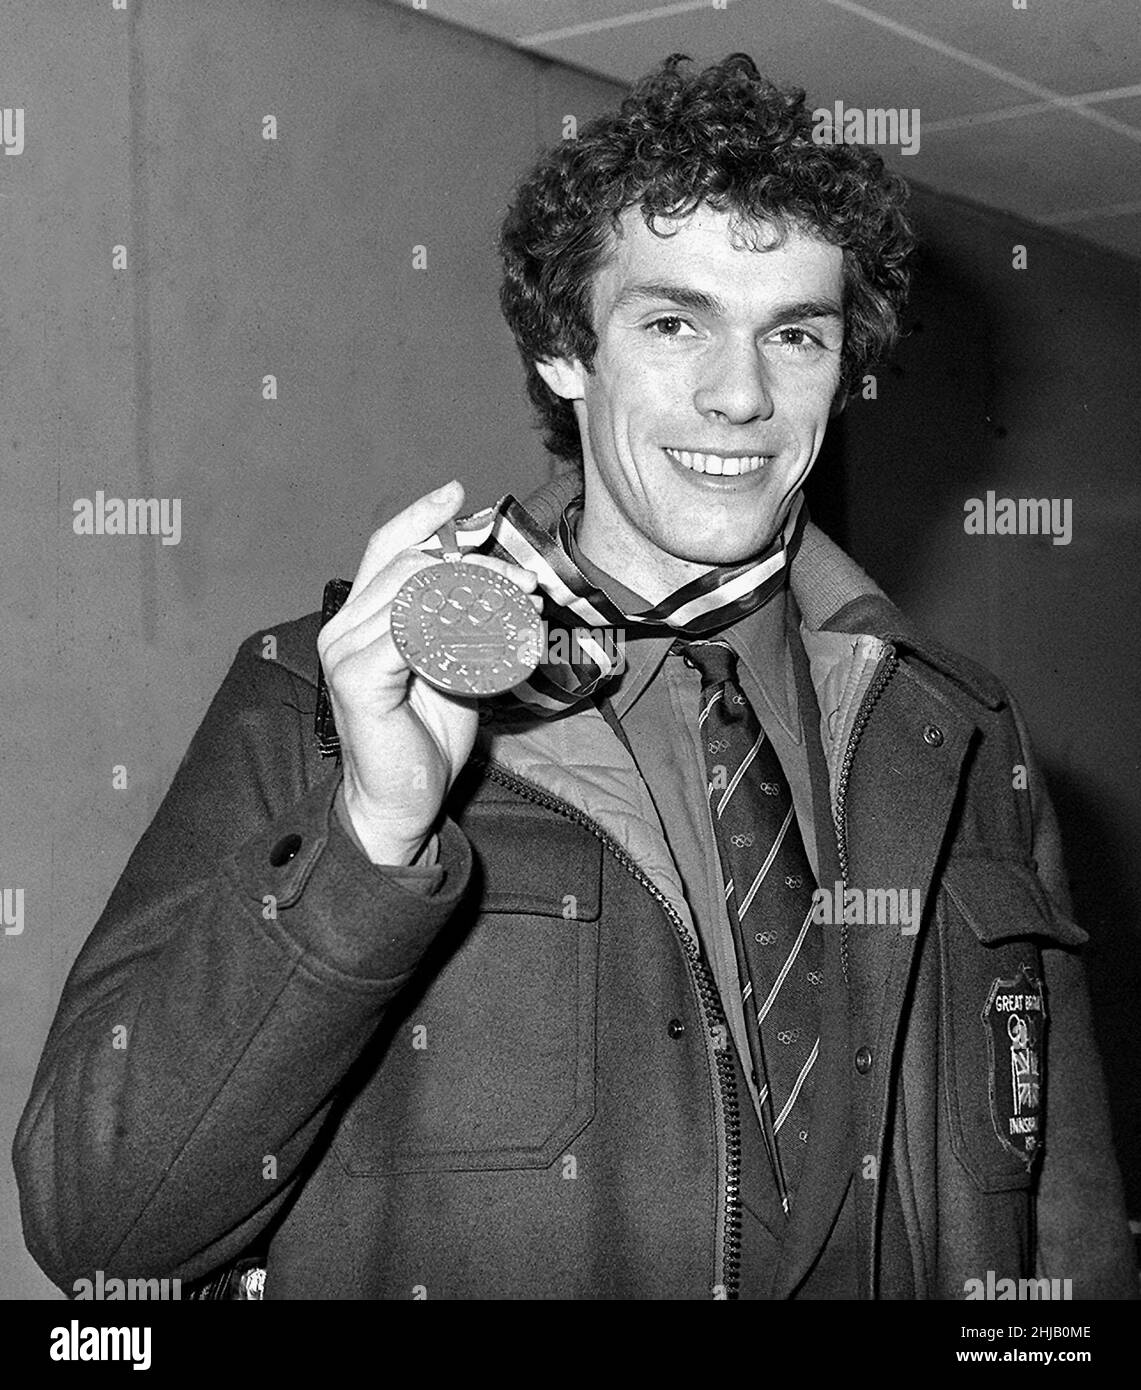 File photo dated 16-02-1976 of First Briton to win the Olympic men's figure-skating championship, John Curry, 26, shows his Gold Medal at Heathrow Airport on his arrival from Innsbruck. Curry was at the peak of his career in 1976 and executed three triple jumps to become Britain’s first male figure skating gold medallist over his big rival, Vladimir Kovalyov of Russia. Curry also won World and European titles that same year, before abruptly turning professional. He was succeeded as men’s Olympic figure skating champion four years later by his fellow Briton, Robin Cousins. Issue date: Friday Ja Stock Photo